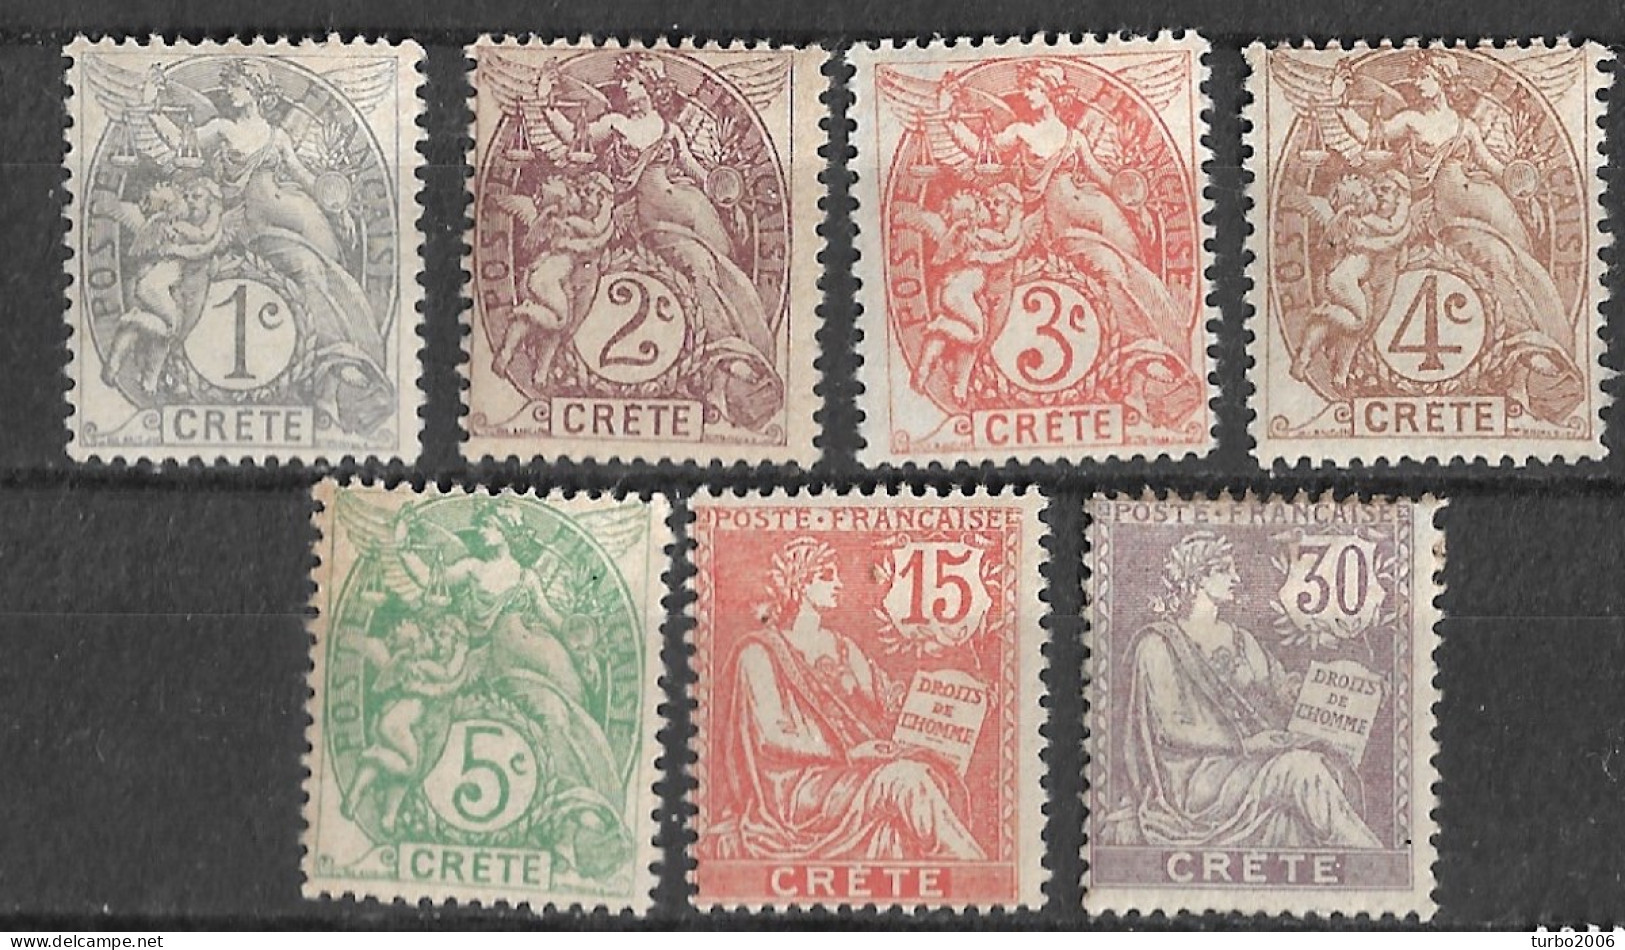 CRETE 1902 French Office : Stamps Of 1900 With Inscription CRETE 7 Values From The Set  Vl. 1 / 5 - 7 - 10 MH - Crete